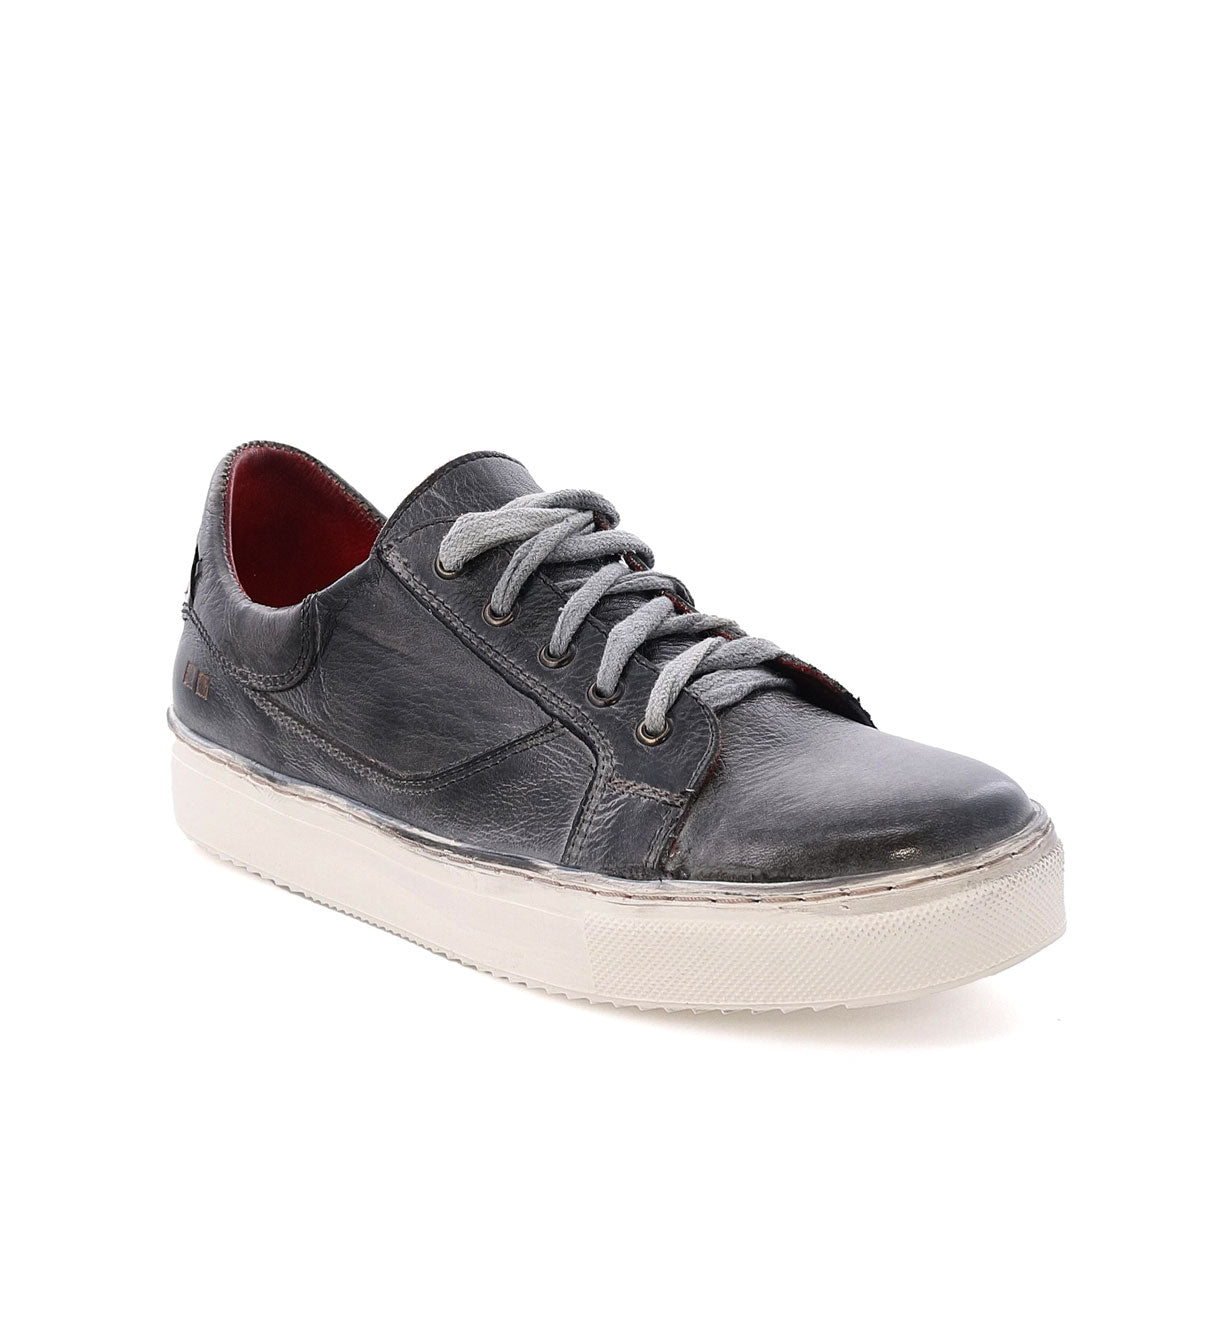 A men's grey leather Azeli sneaker with laces by Bed Stu.